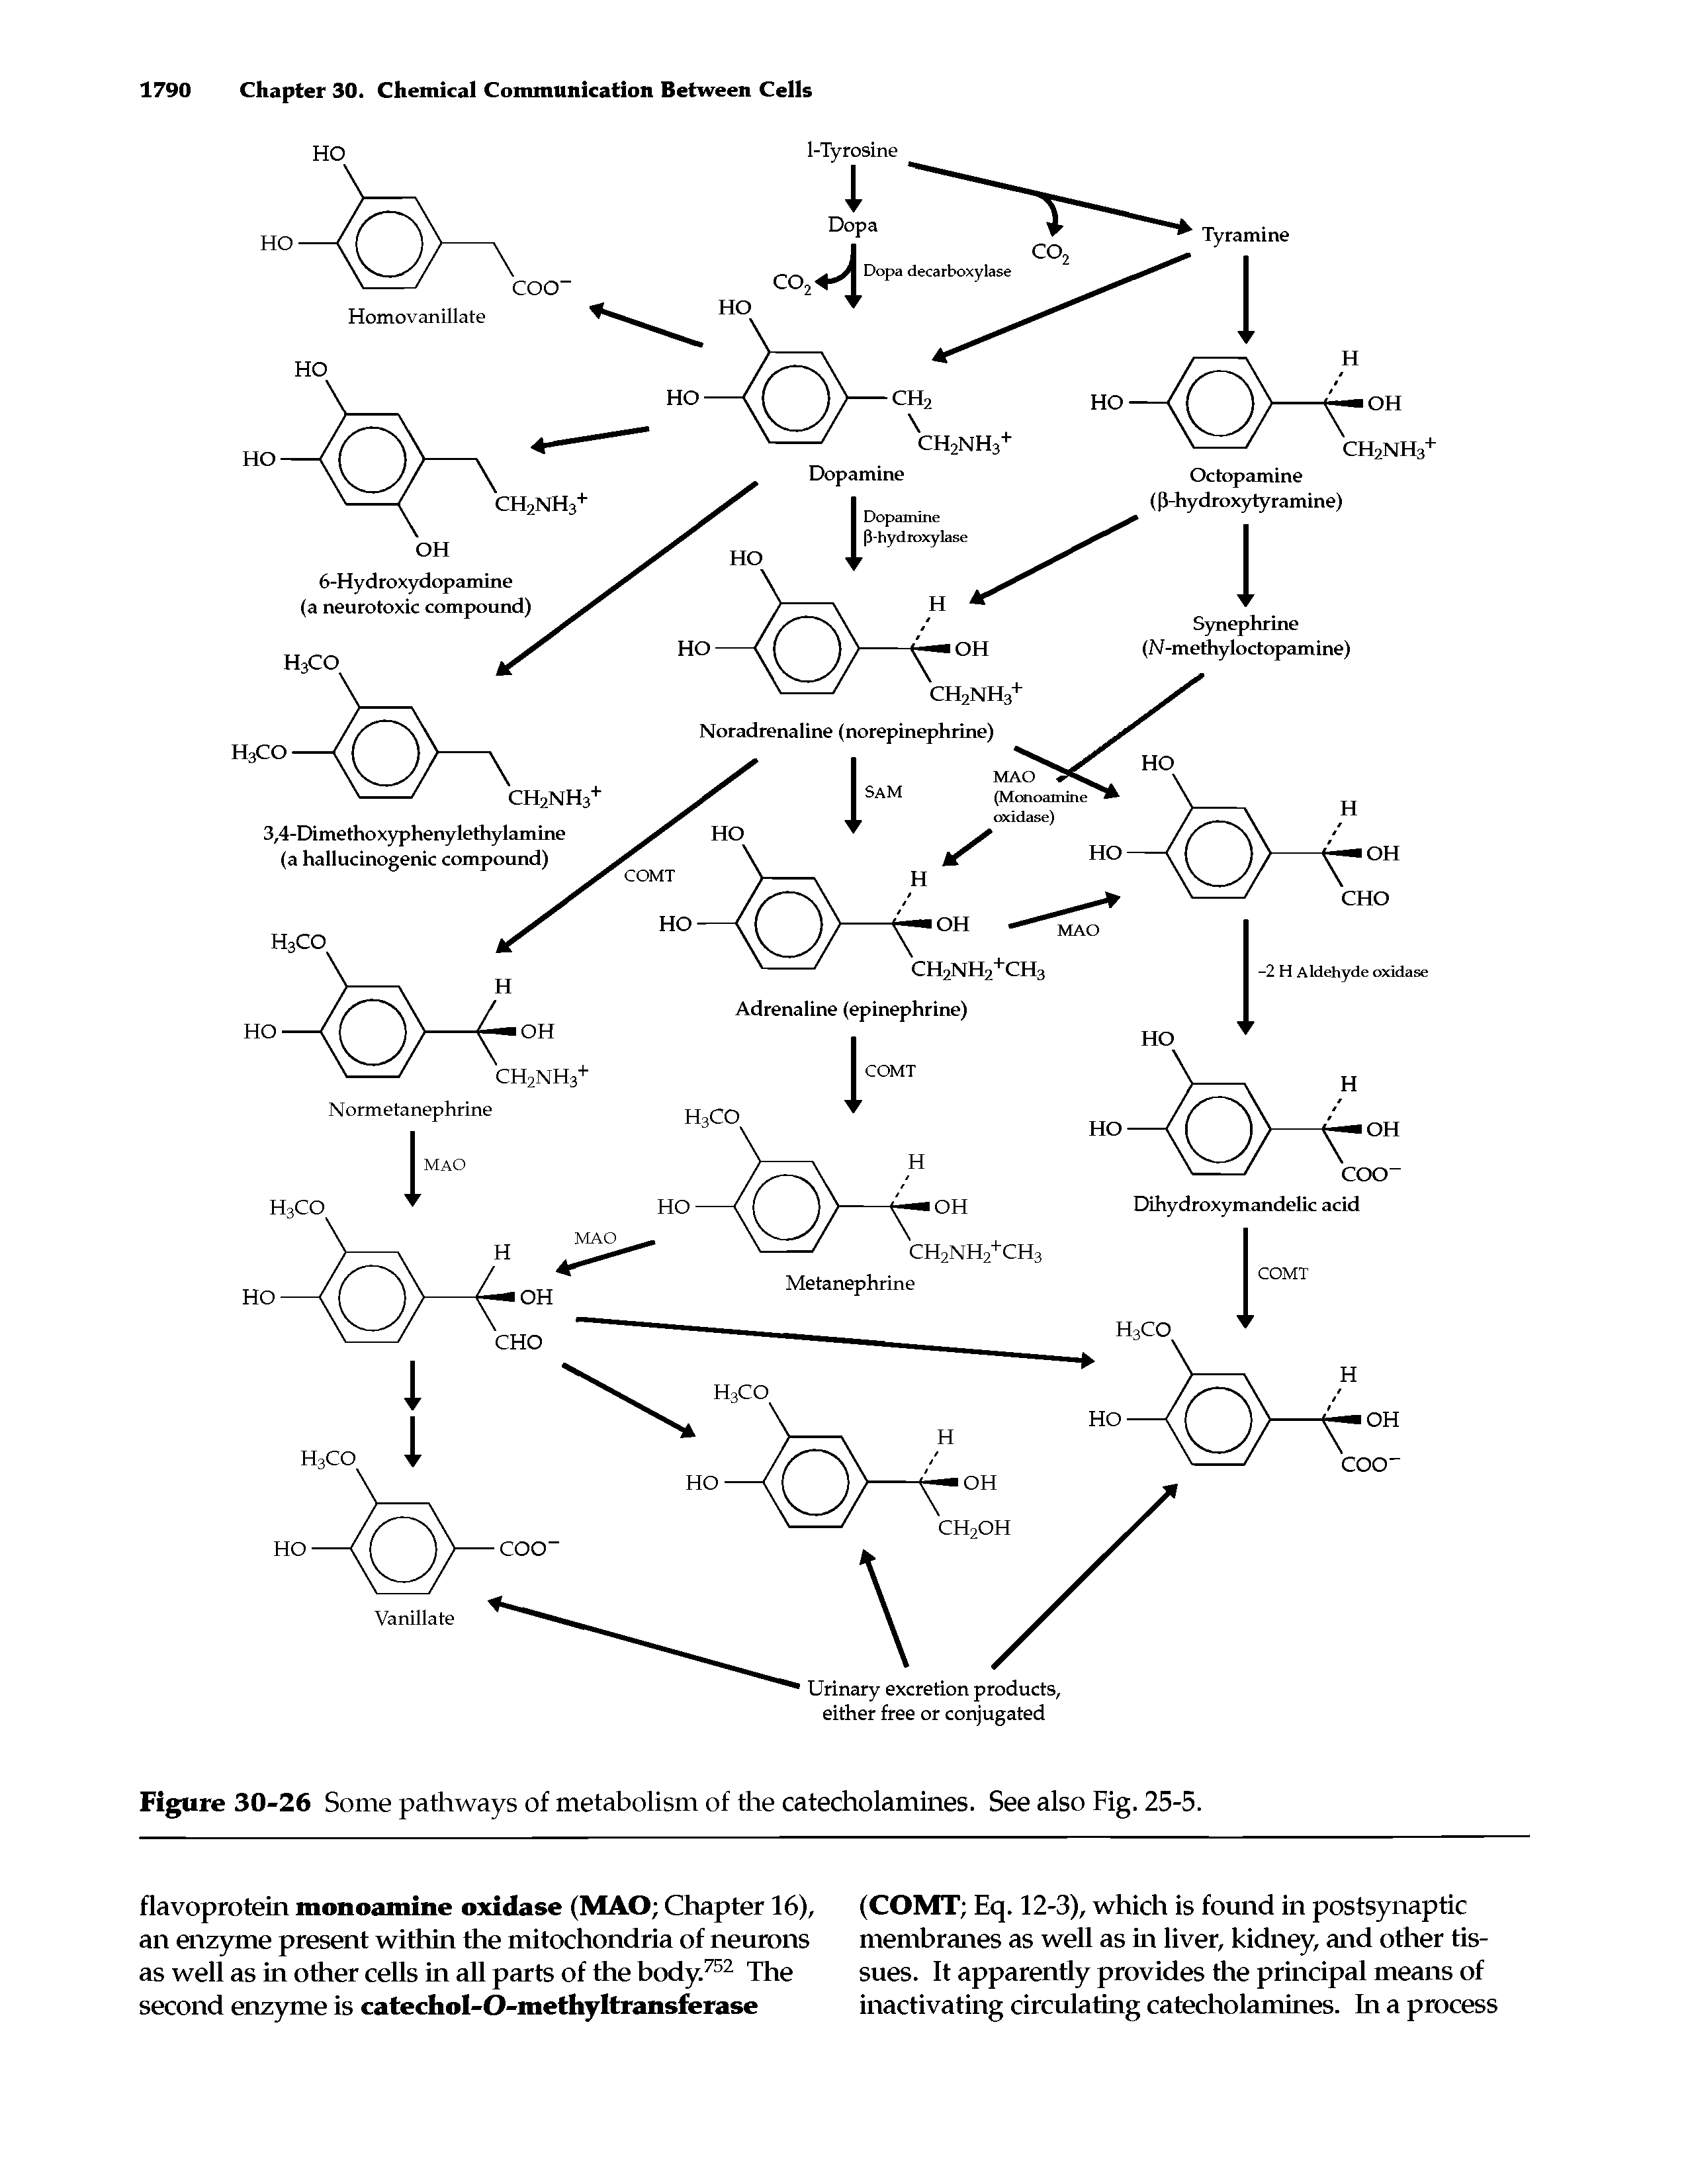 Figure 30-26 Some pathways of metabolism of the catecholamines. See also Fig. 25-5.